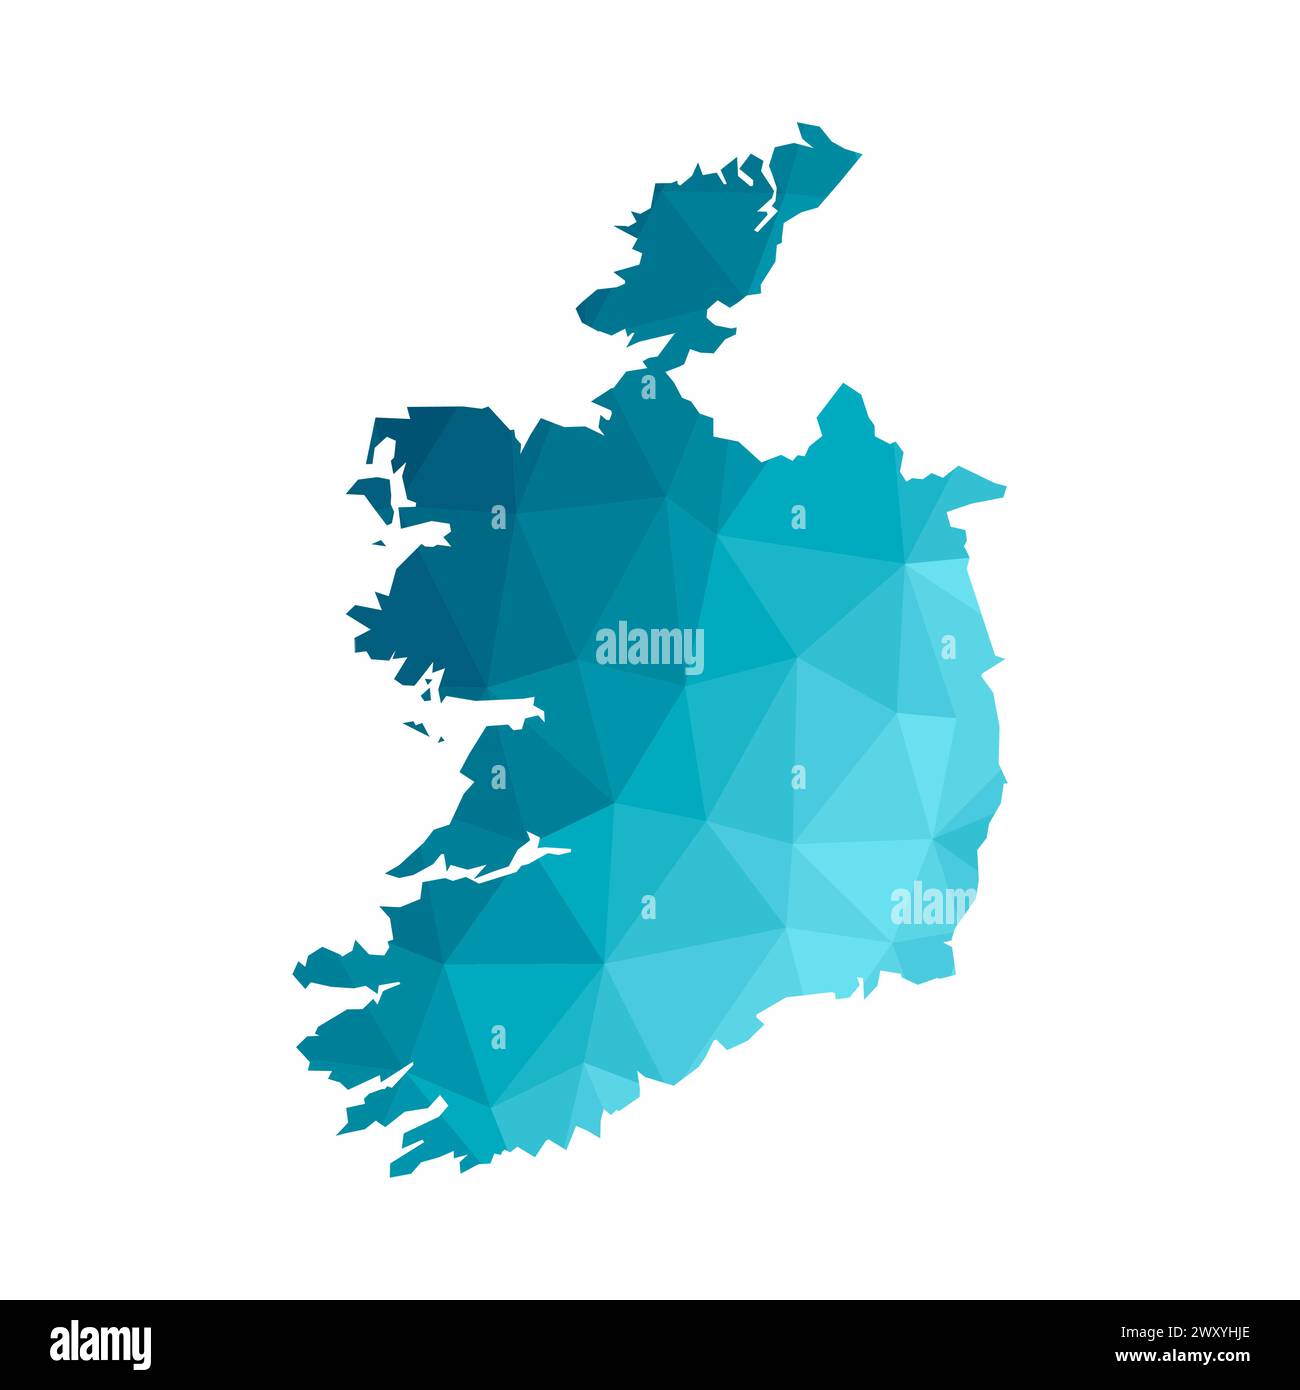 Vector isolated illustration icon with simplified blue silhouette of Republic of Ireland map. Polygonal geometric style, triangular shapes. White back Stock Vector